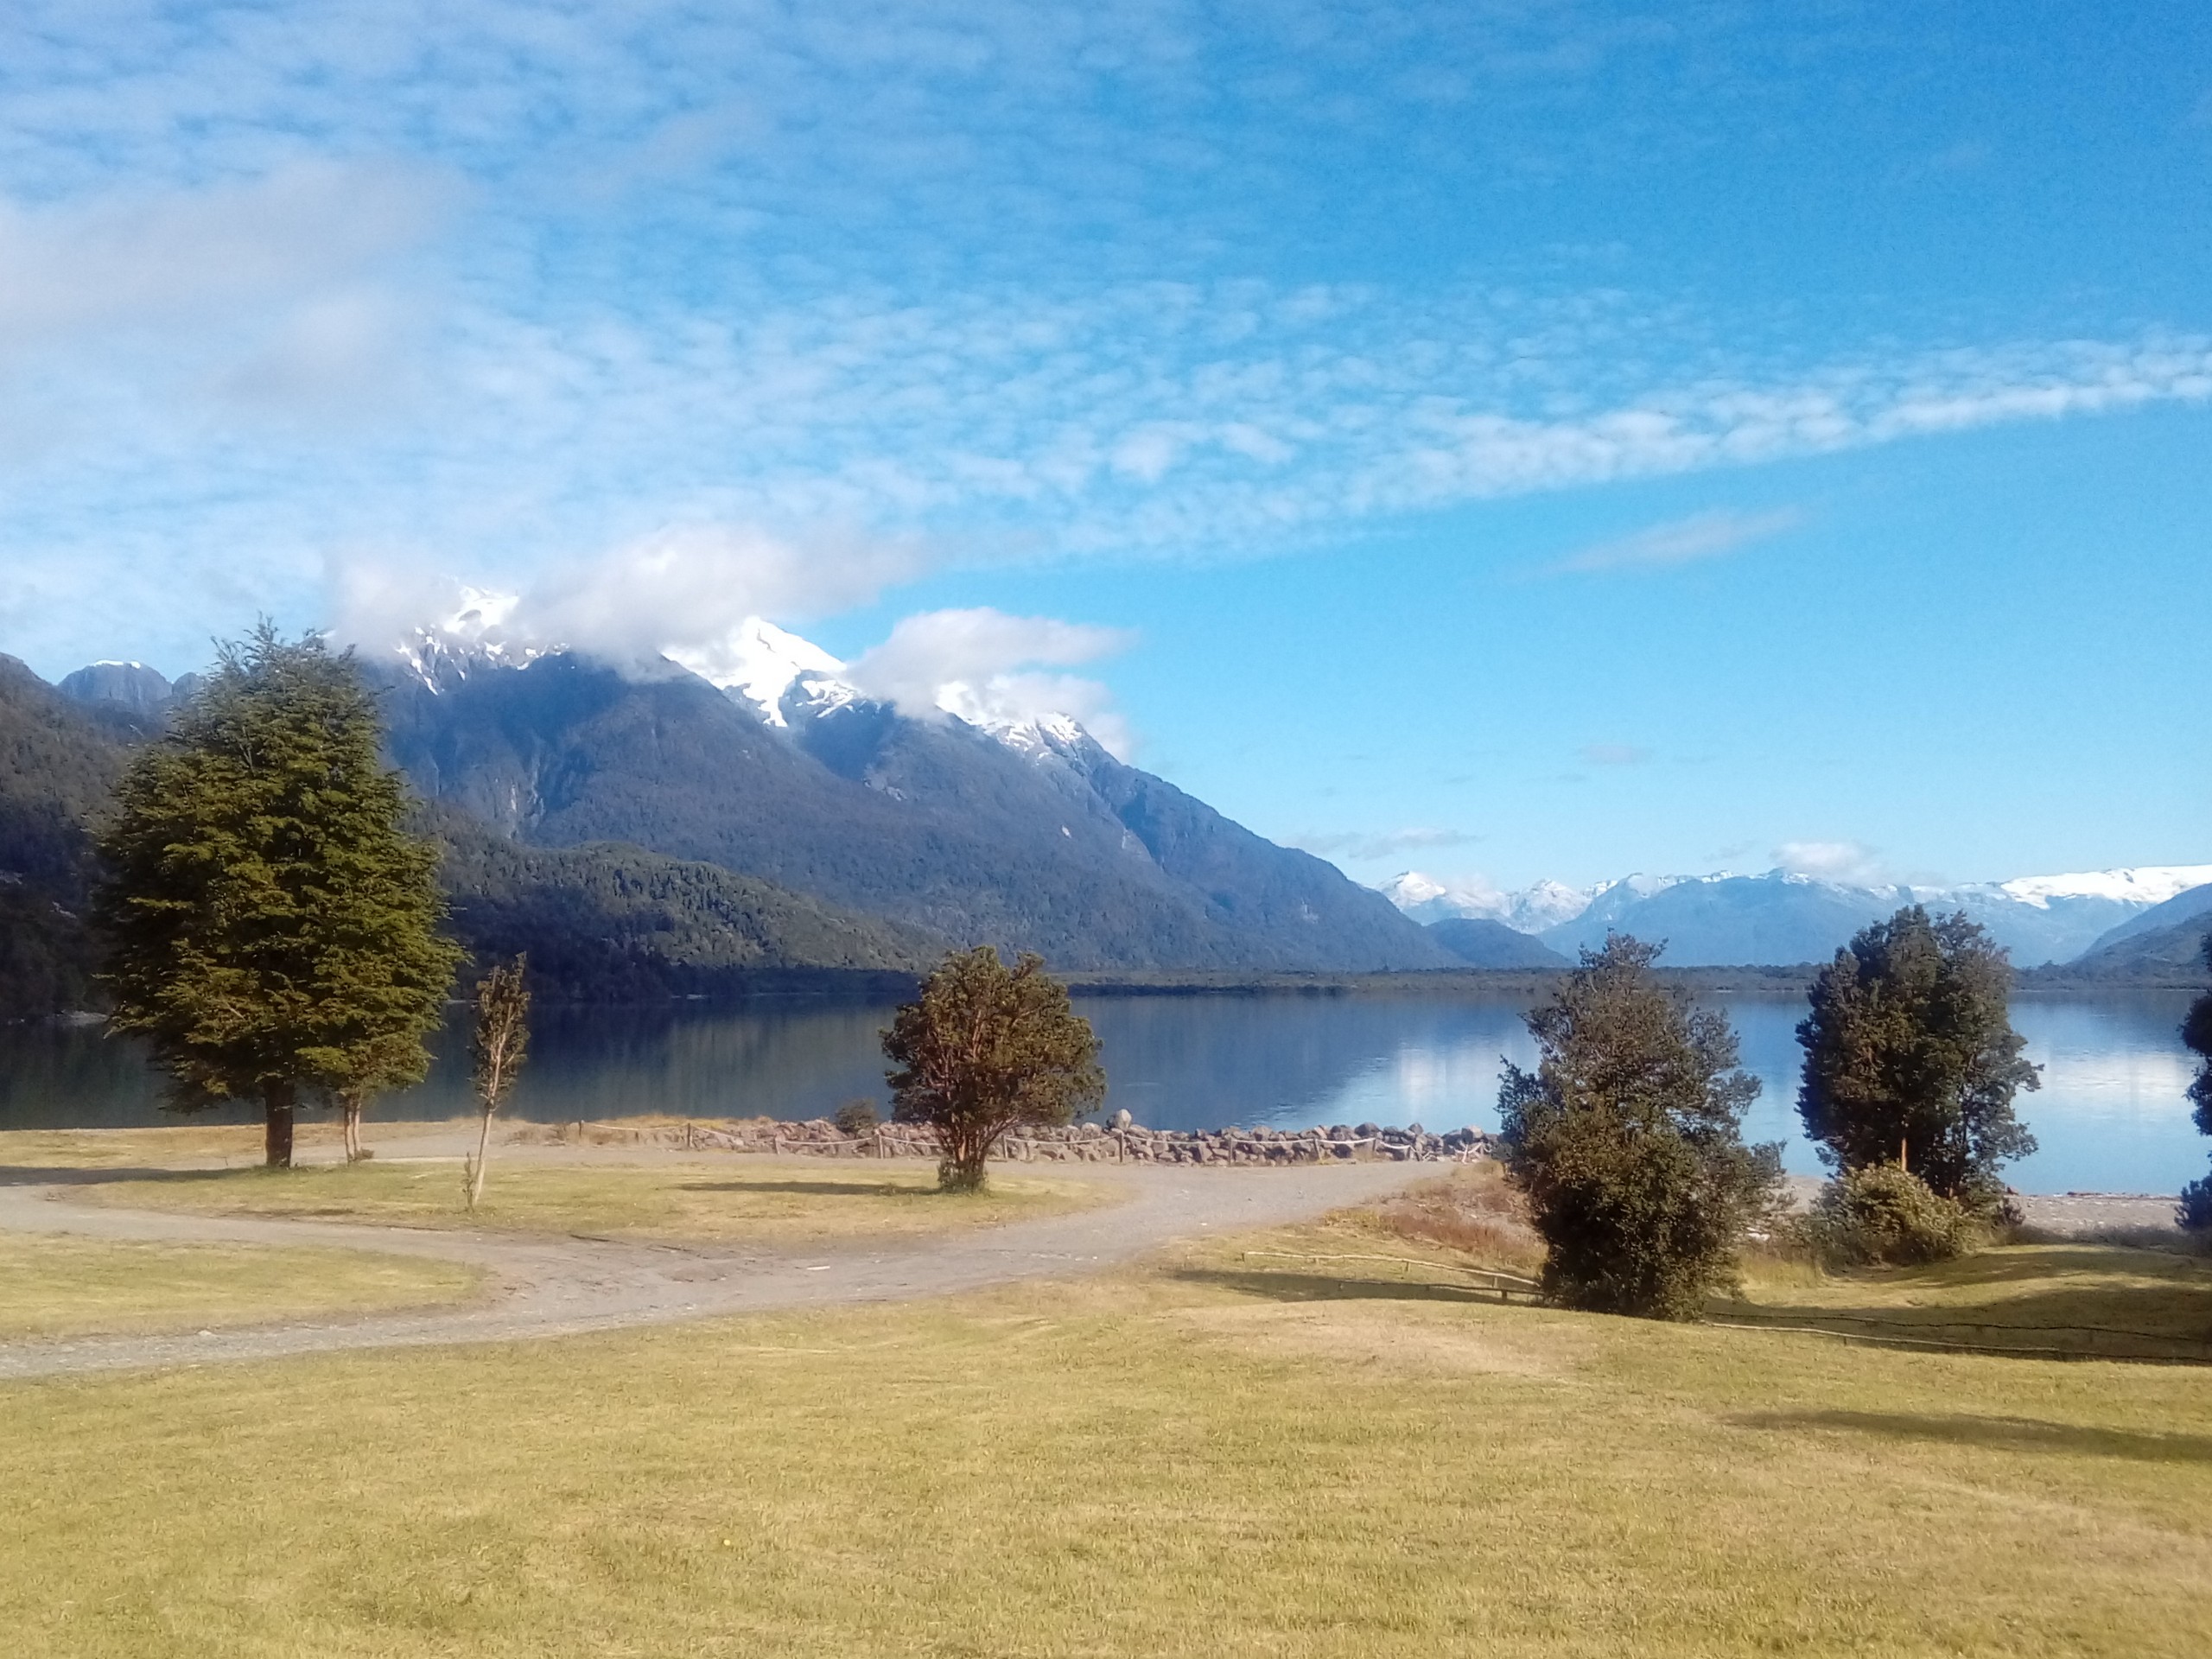 Lago Yelcho, as seen on a self-guided tour